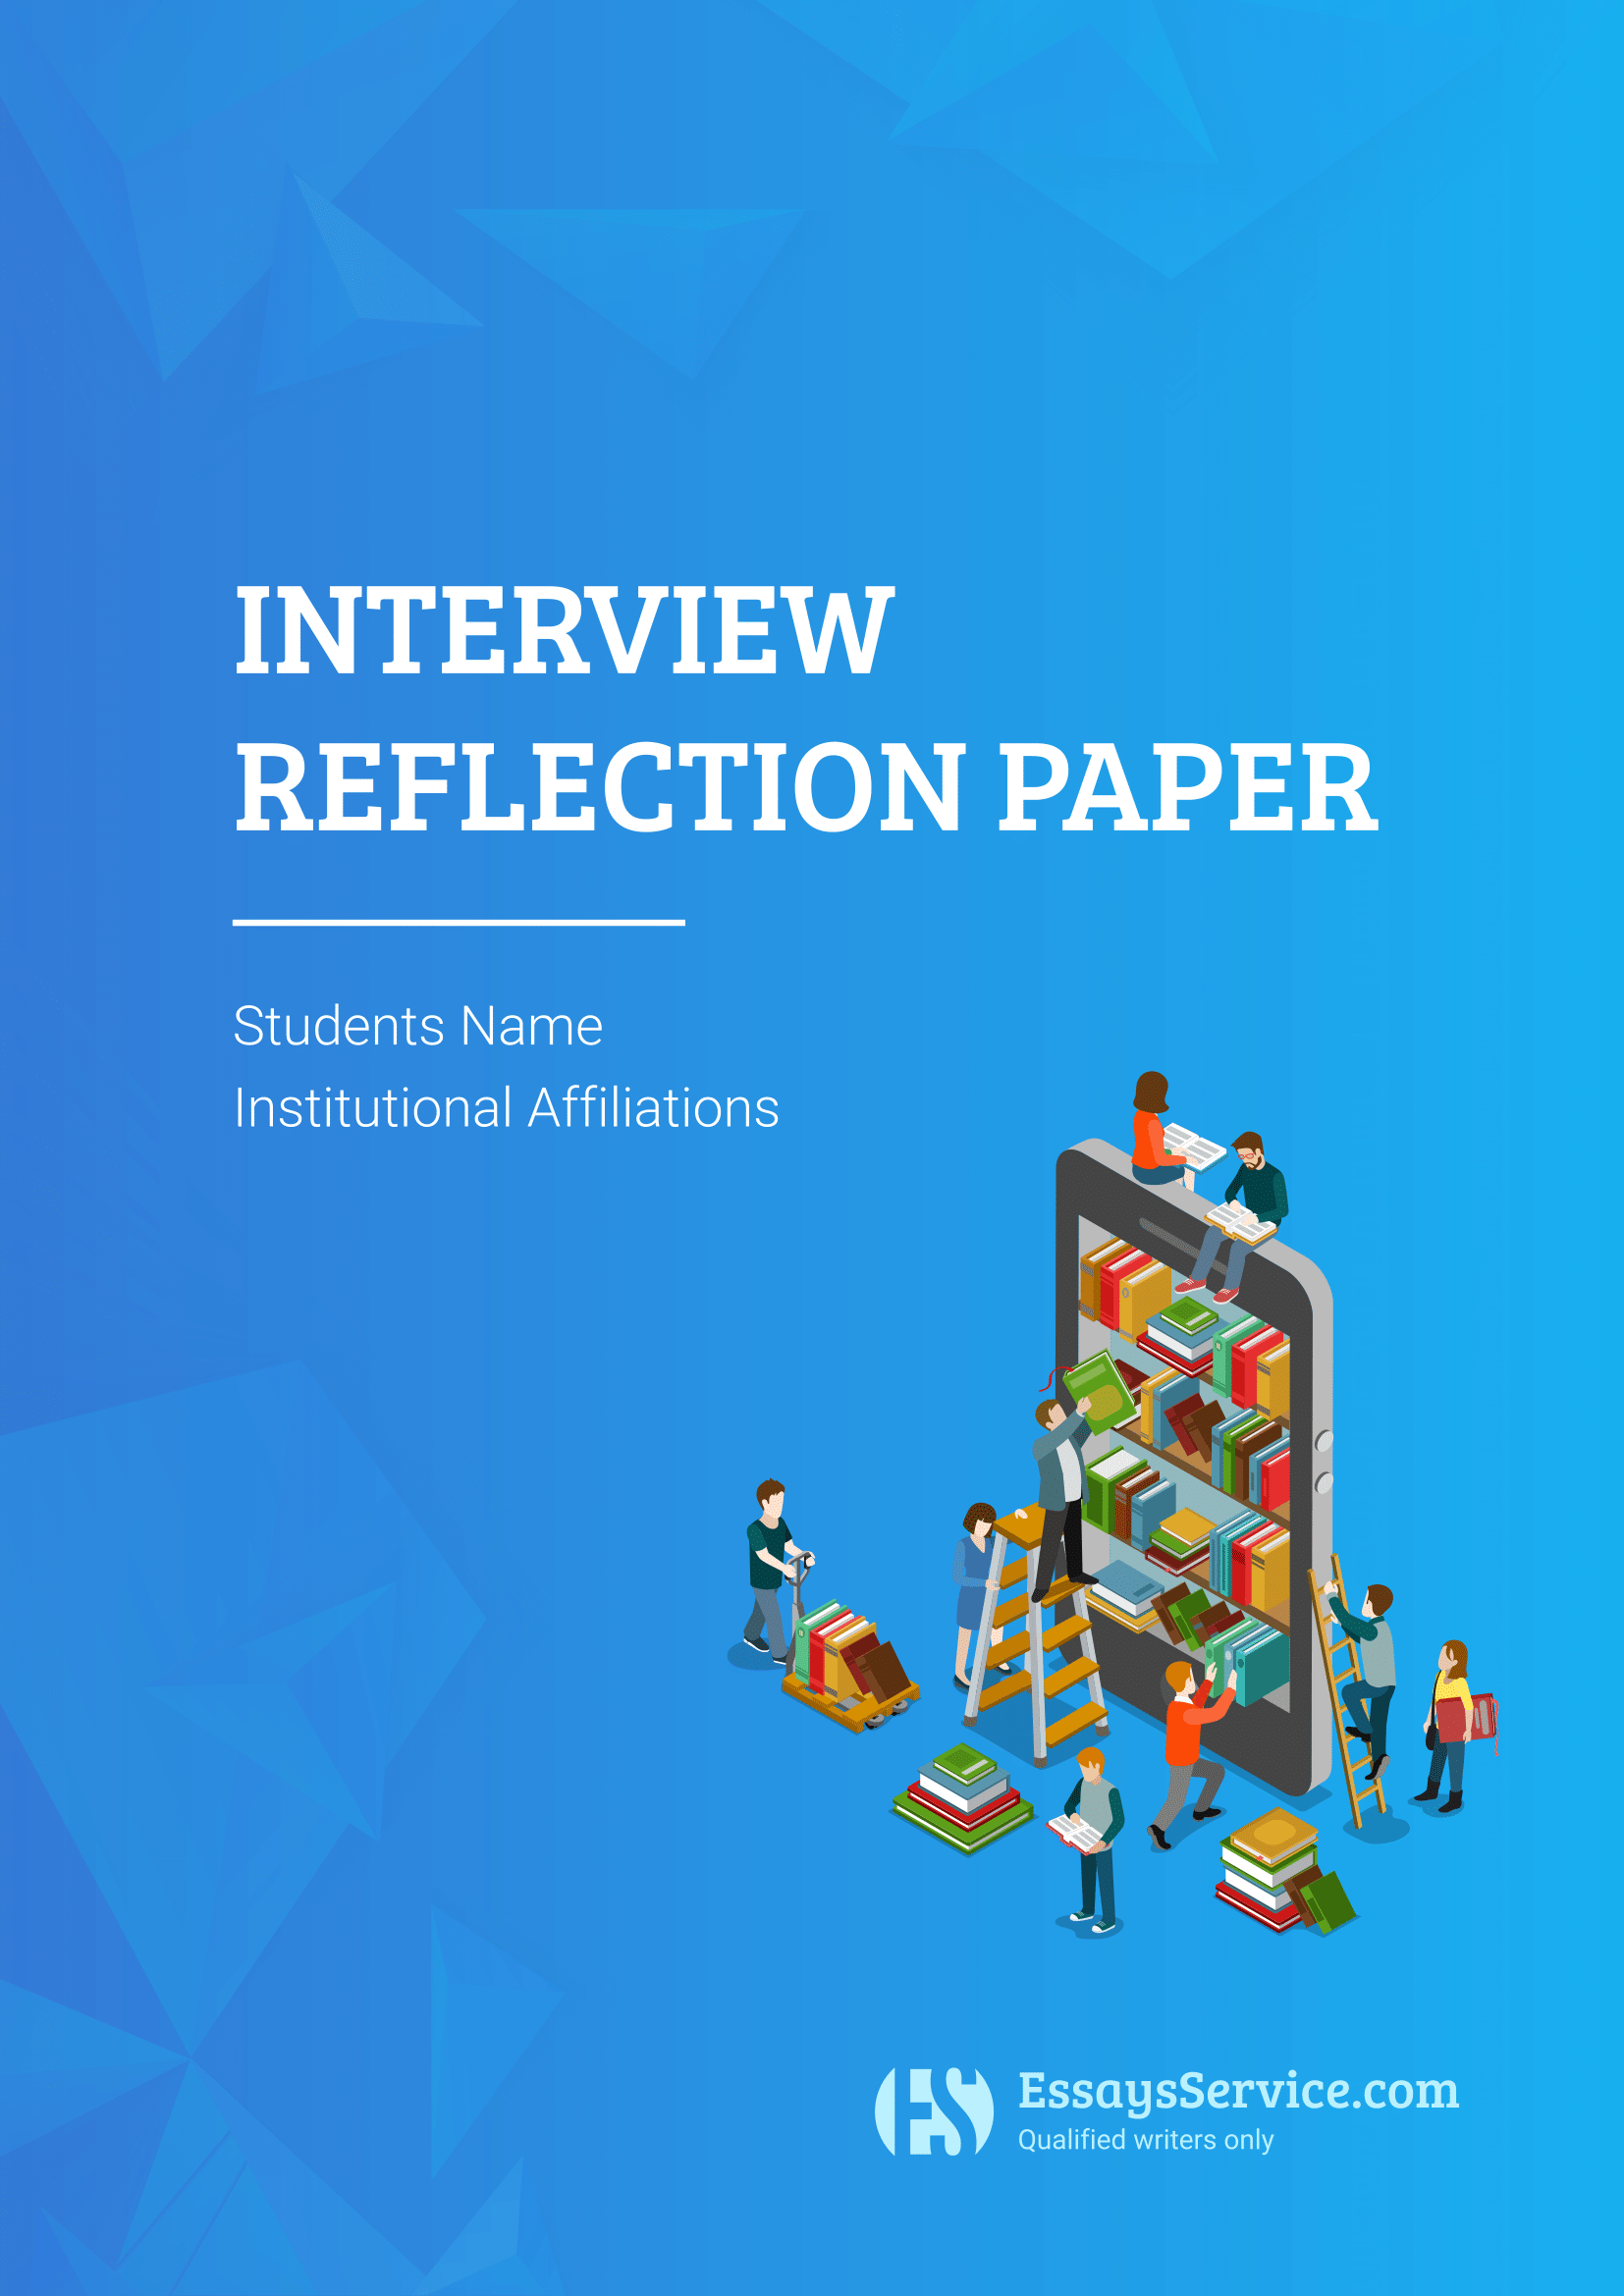 reflection on interview experience essay brainly